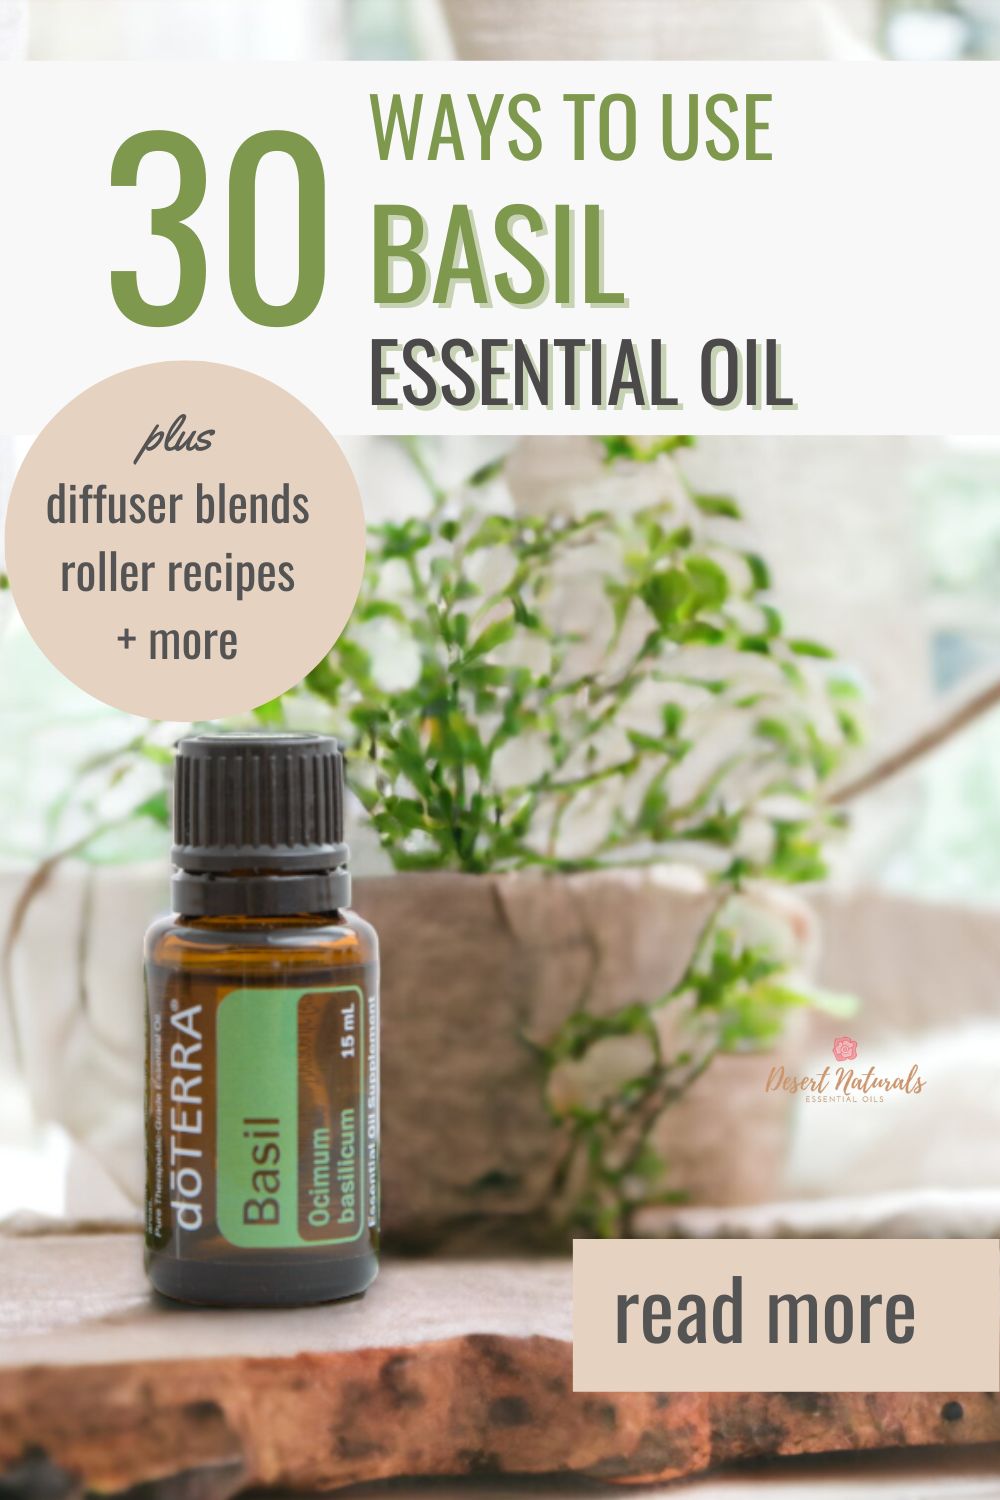 image of doterra basil essential oil plus text 30 ways to use basil essential oil
